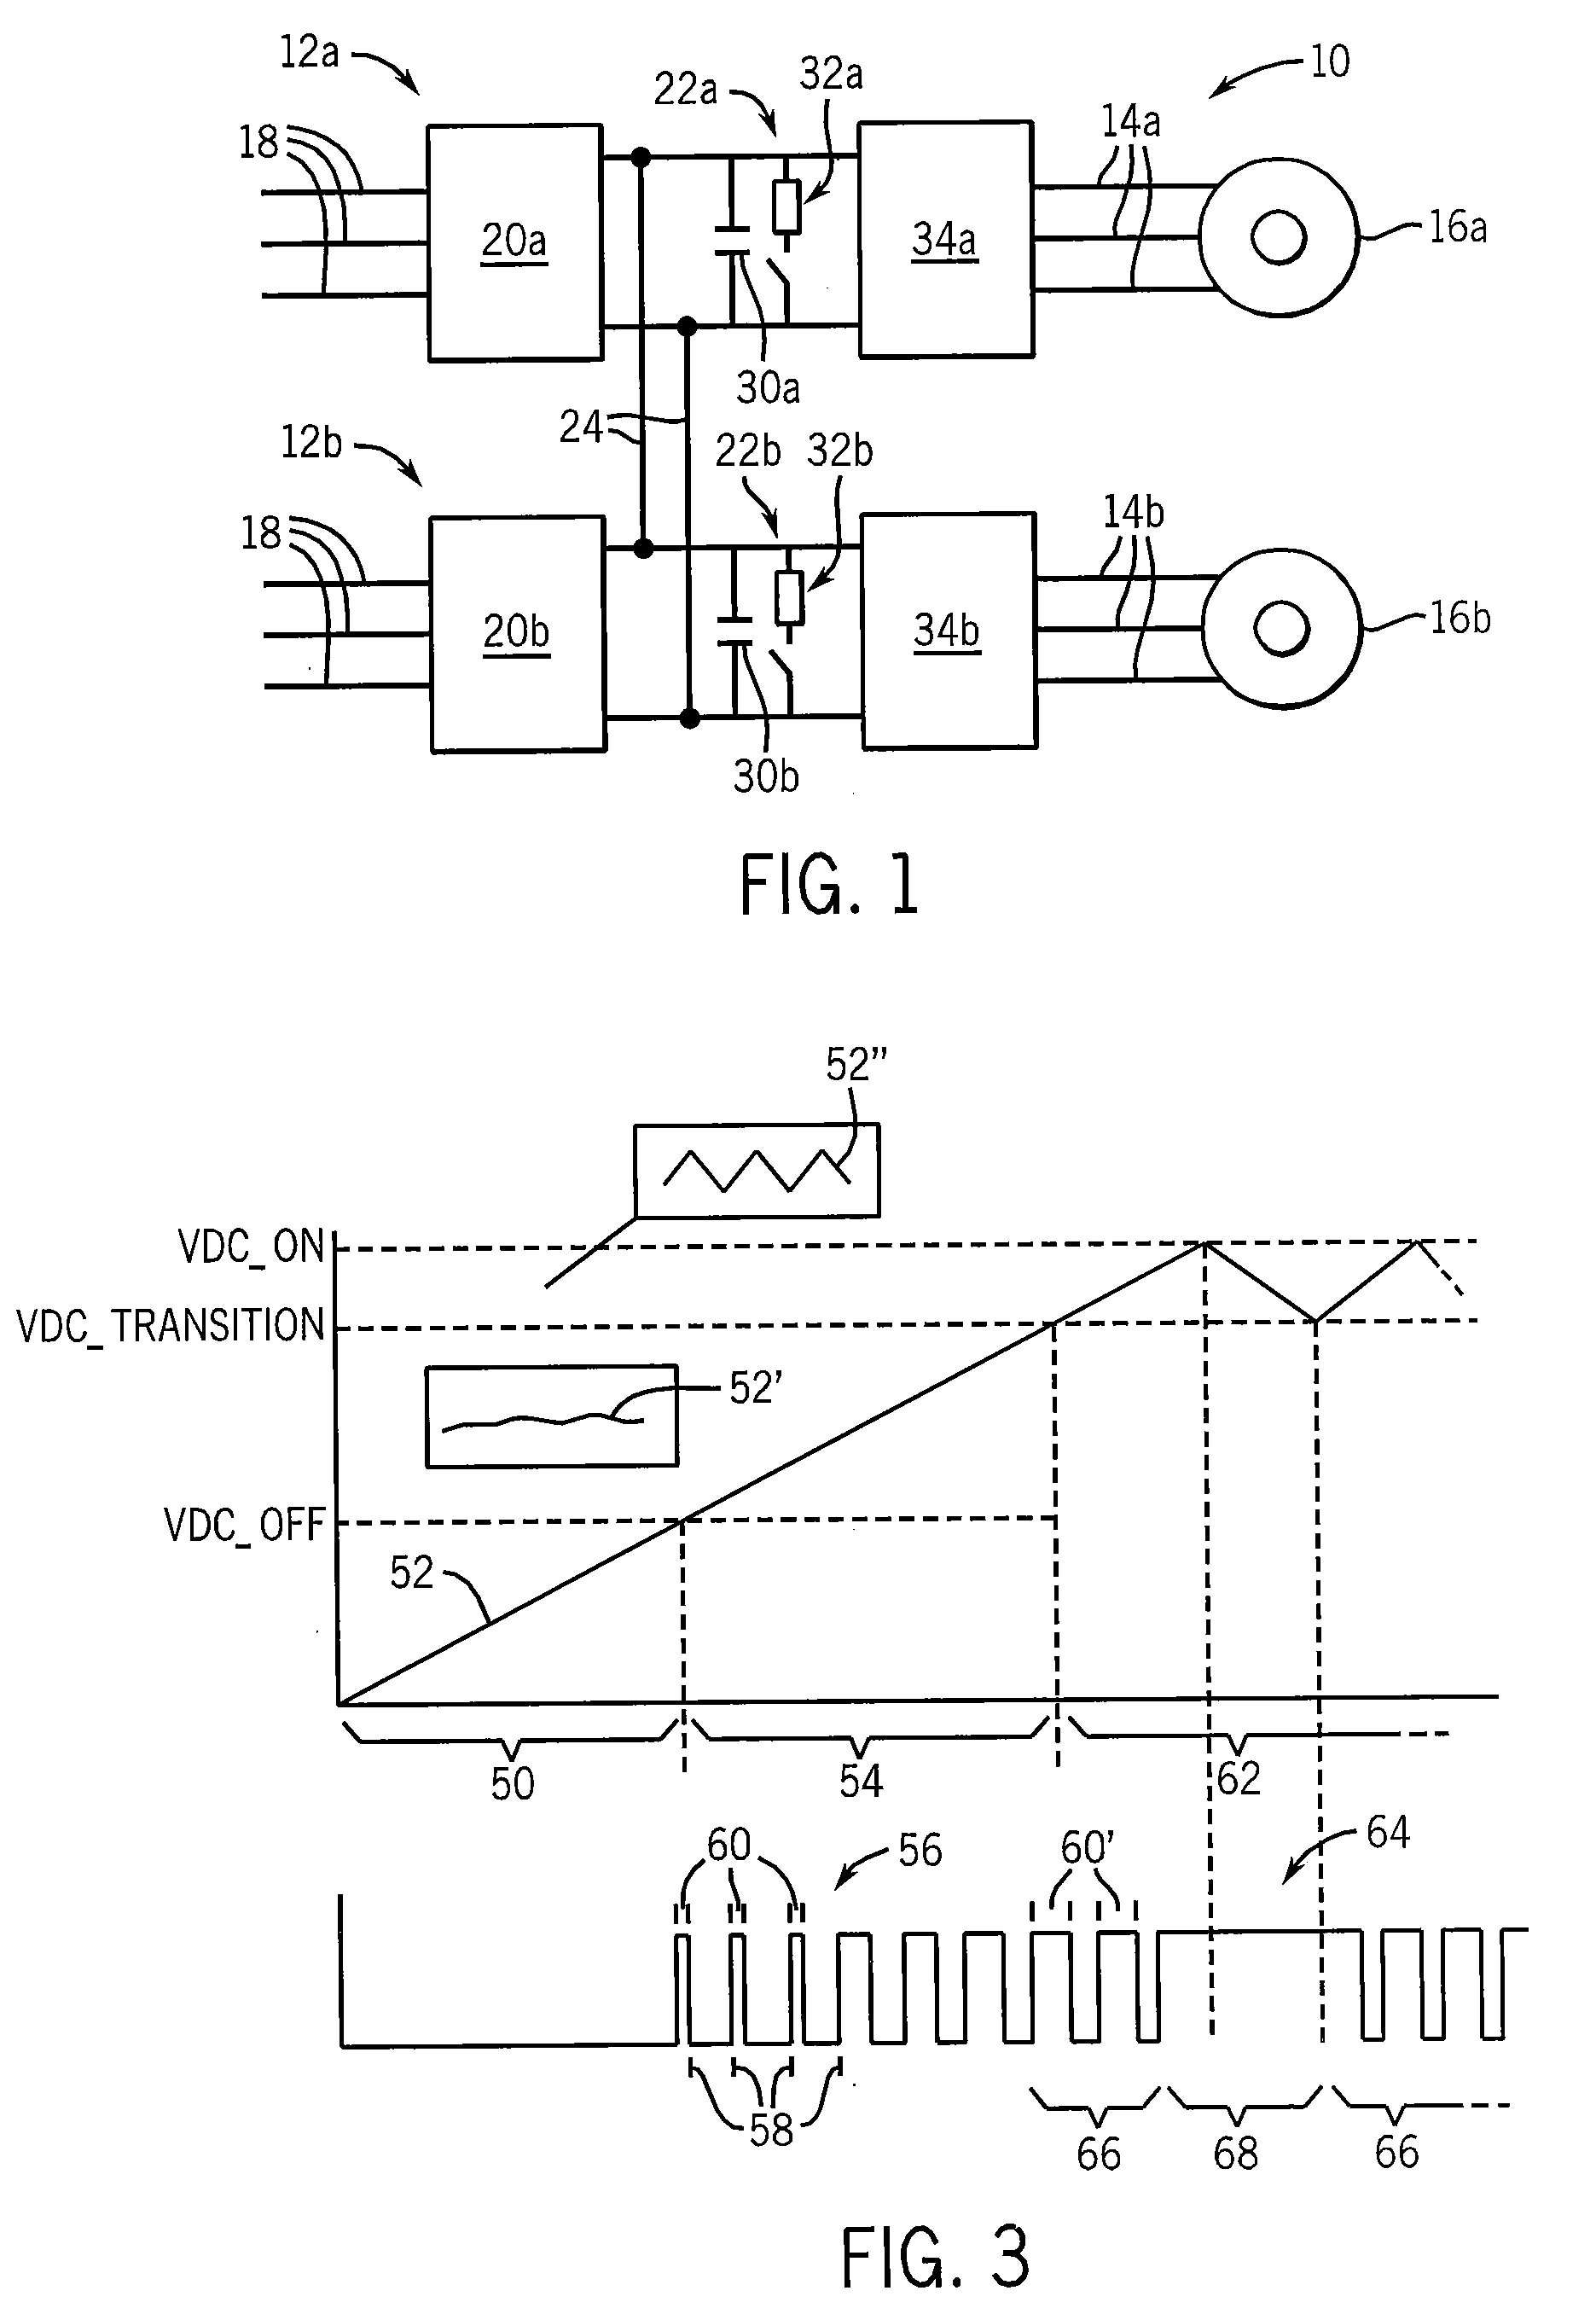 Electric motor drive employing hybrid, hysteretic/pulse-width-modulated dynamic braking